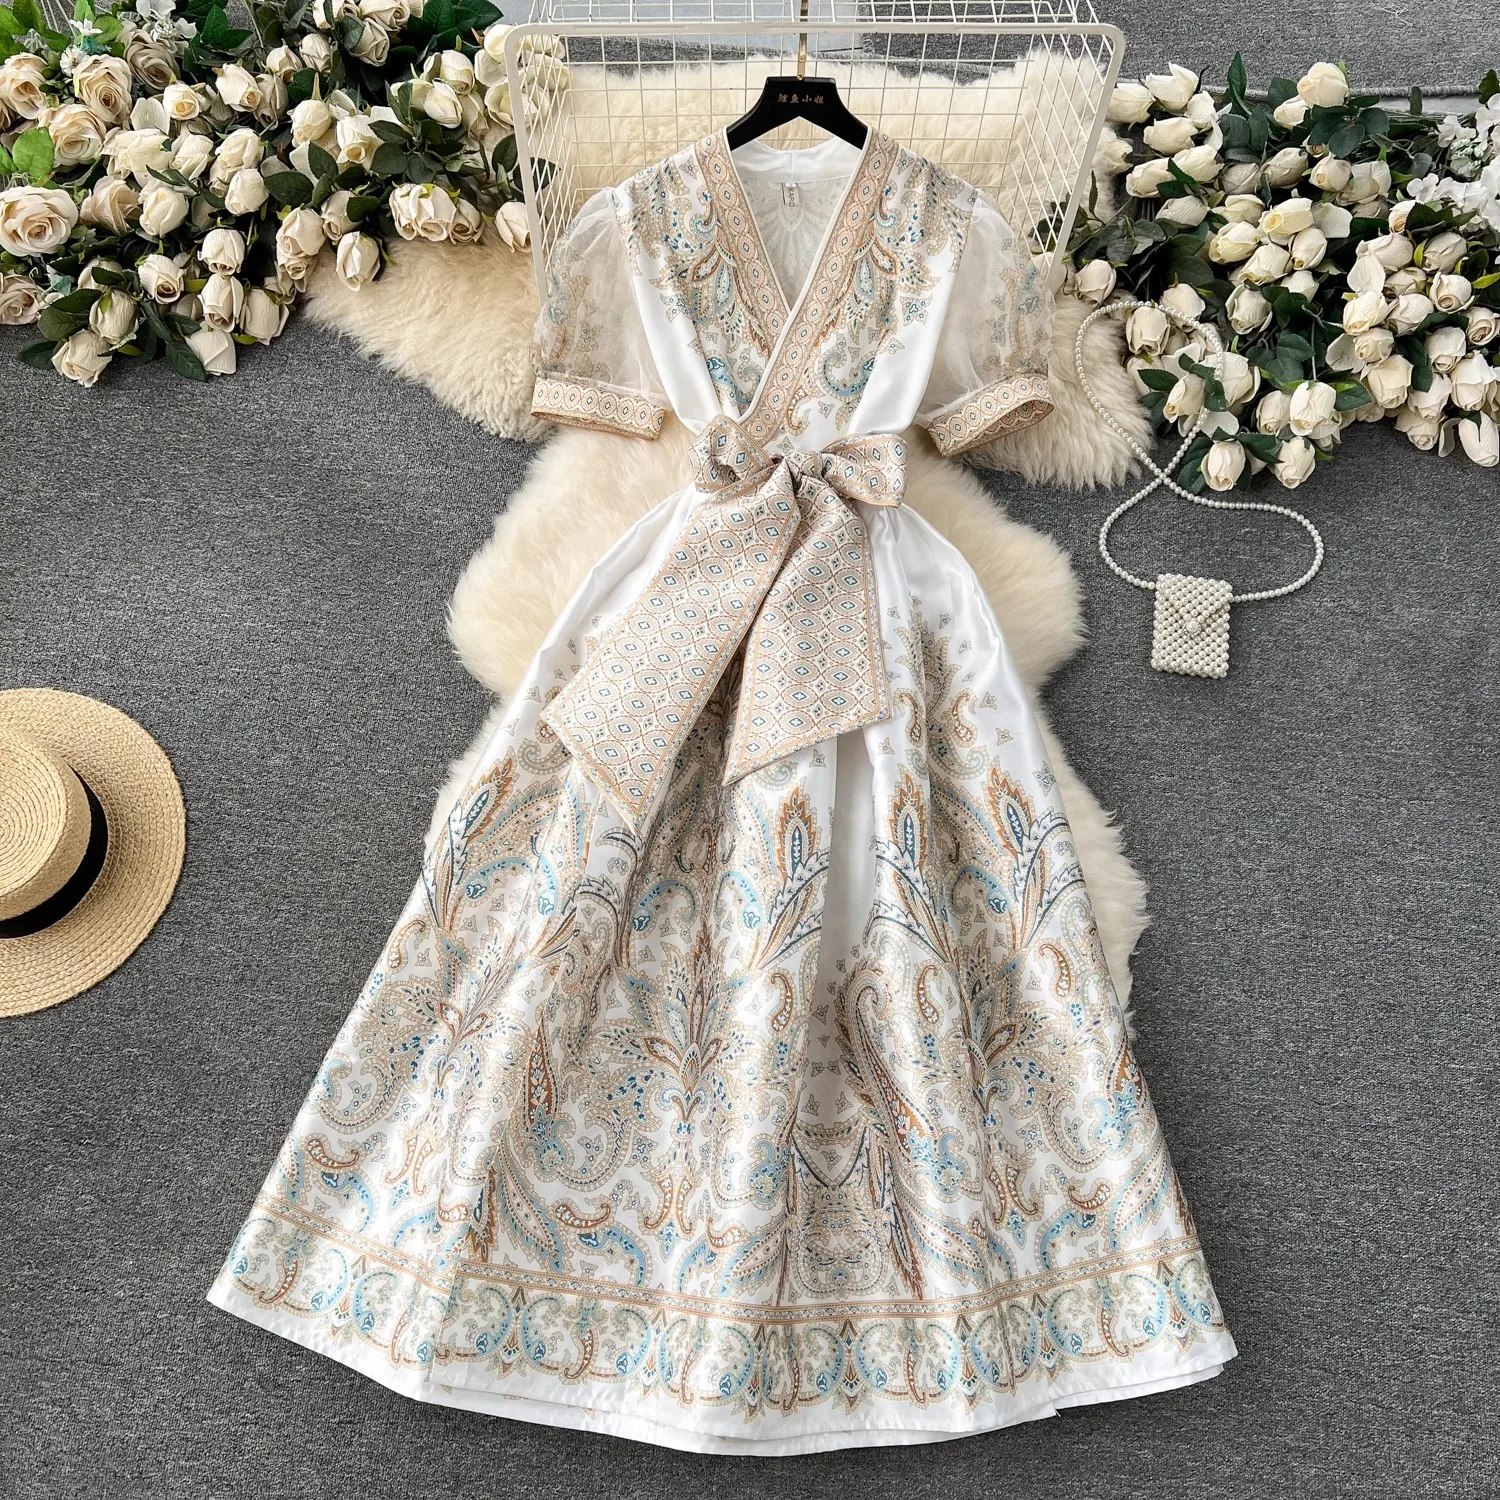 

Vintage Summer Paisley Print Holiday Long Dresses Bohemian Women's V Neck Puff Short Sleeve Flower Lace Up Sashes Clothes Robe